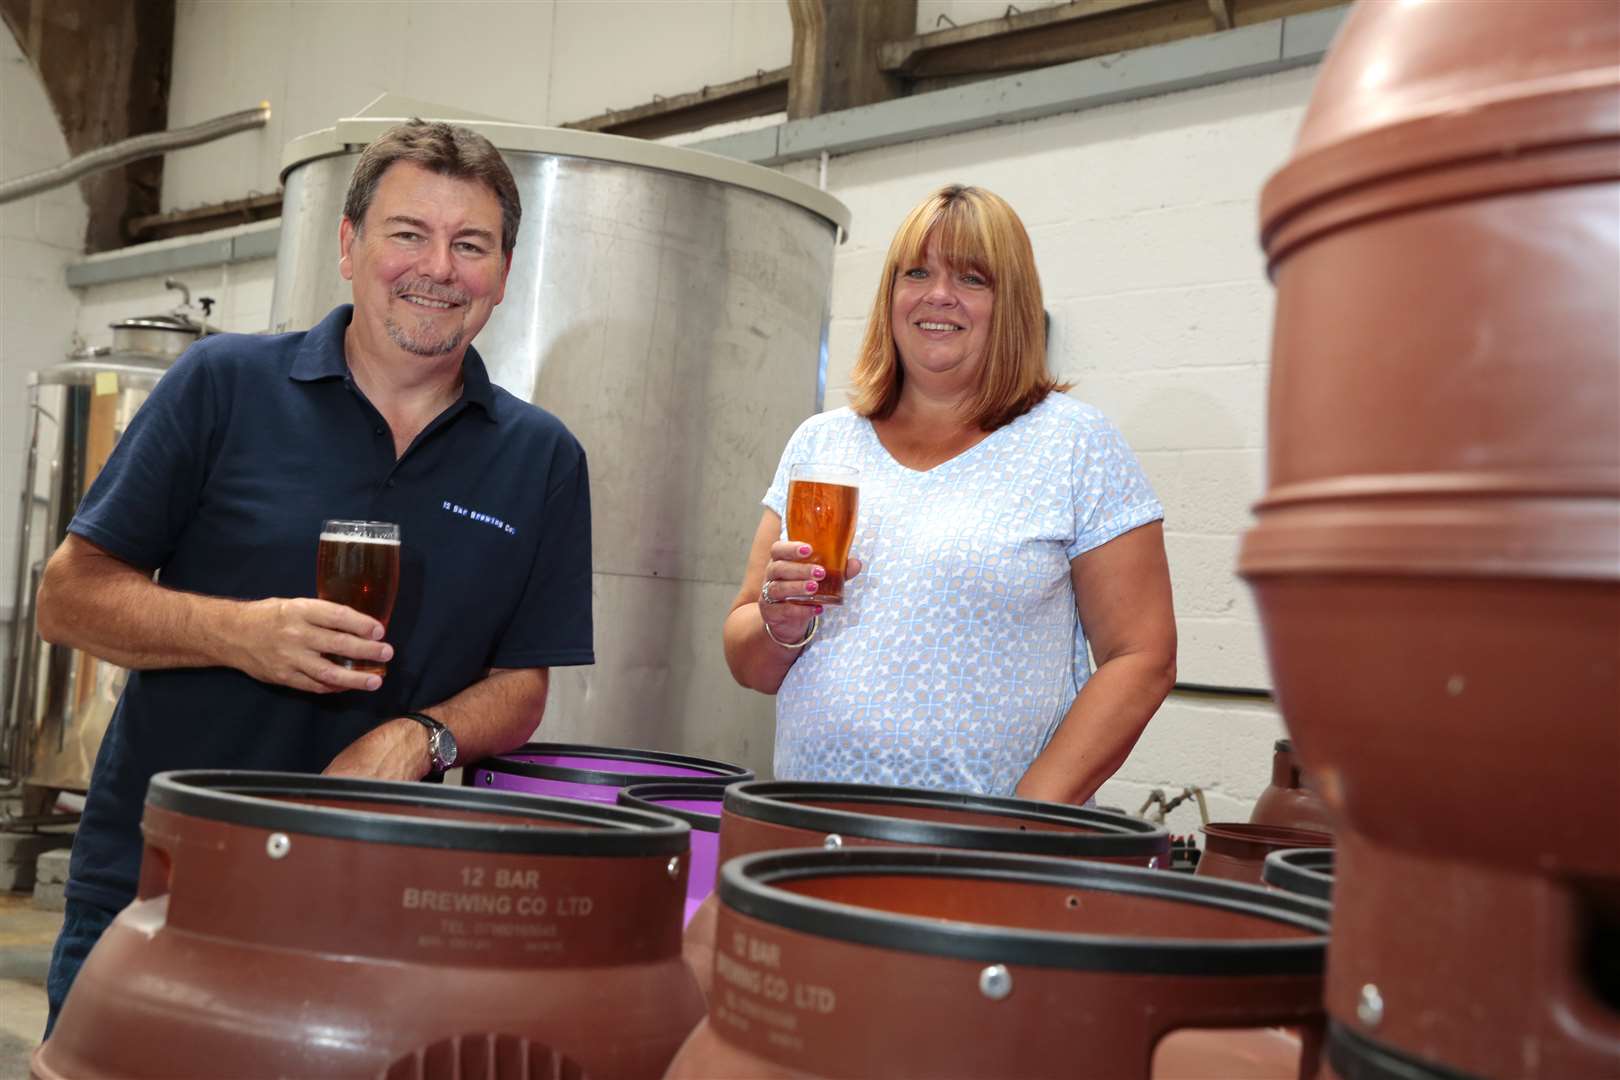 Steve and Jacqui Hefft are among a surge of new brewers taking advantage of a growing taste for niche beers